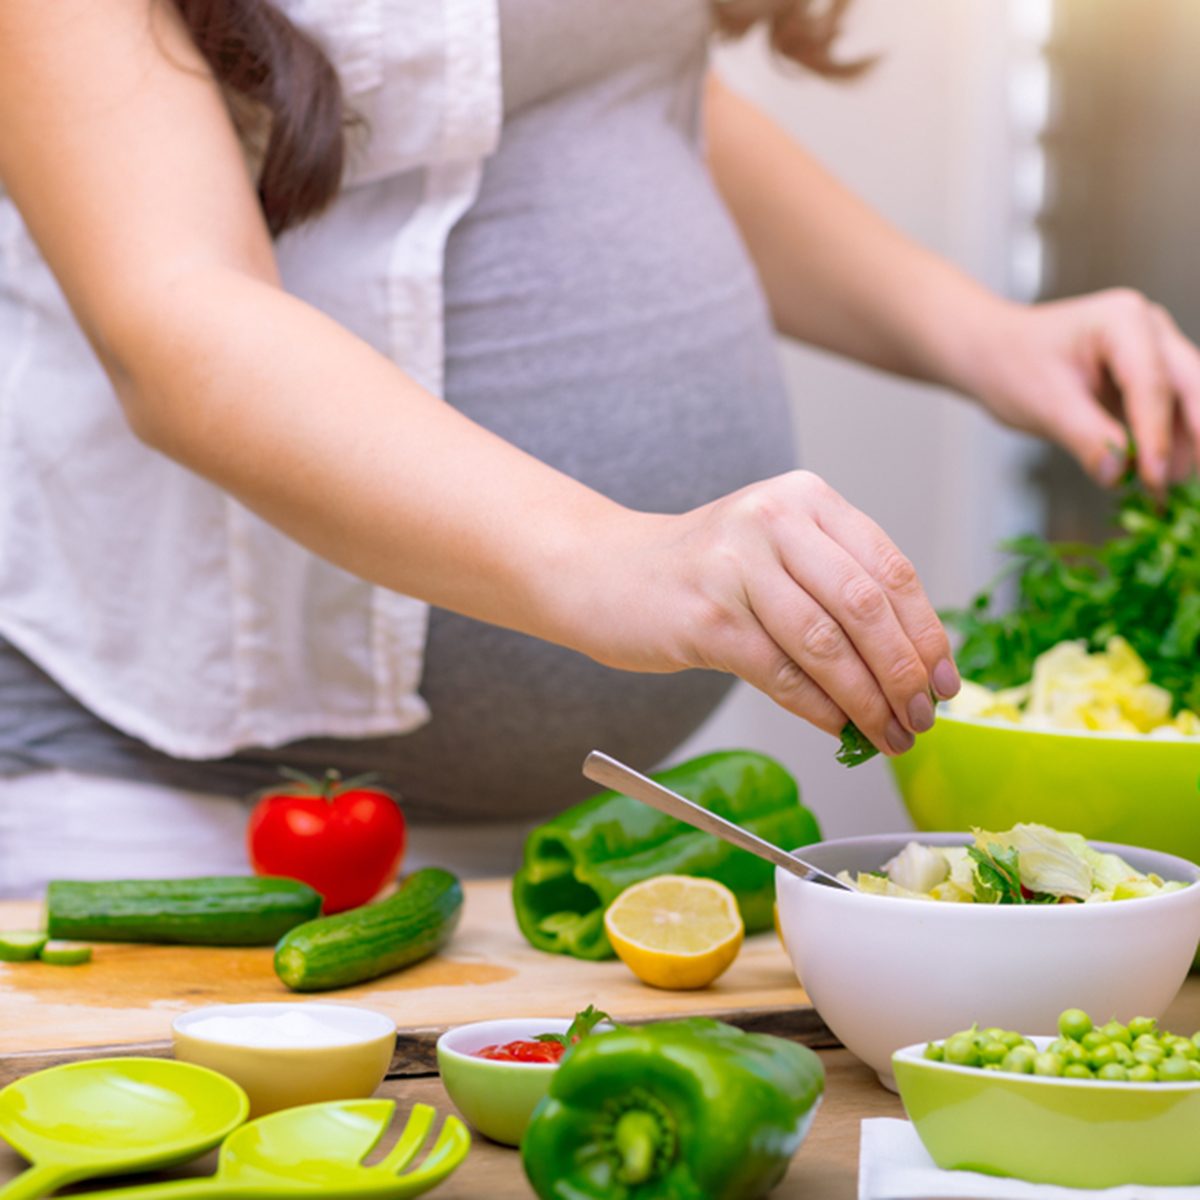 15-foods-to-avoid-during-pregnancy